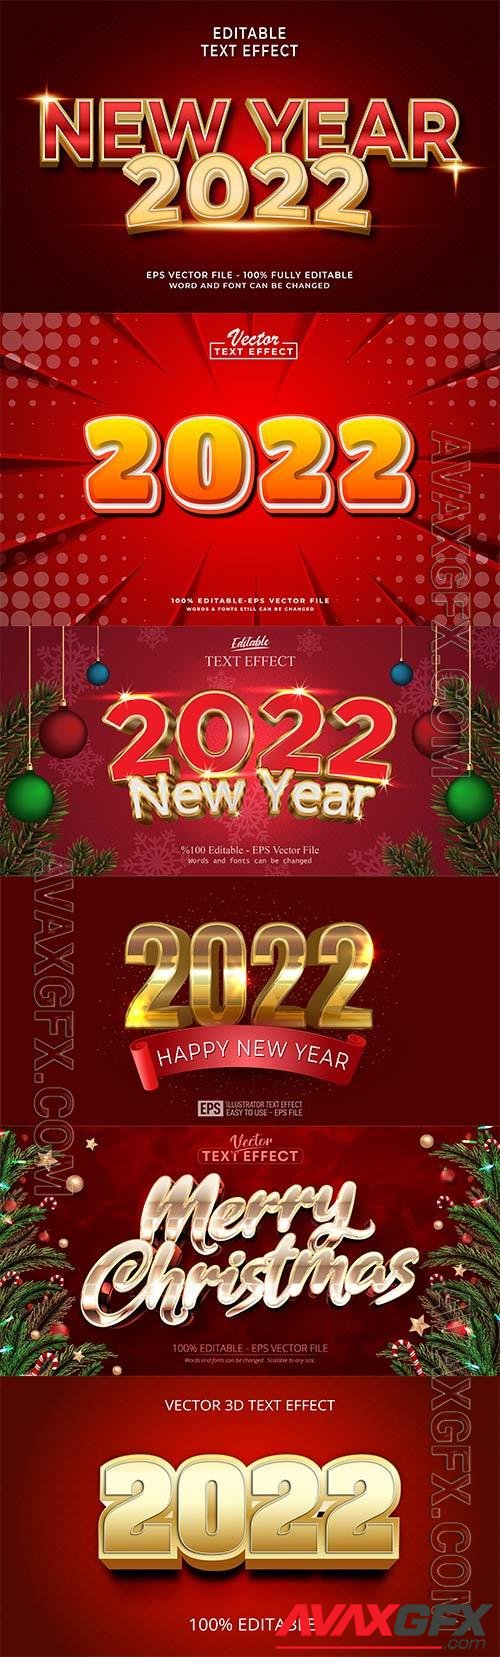 Merry christmas and happy new year 2022 editable vector text effects vol 3